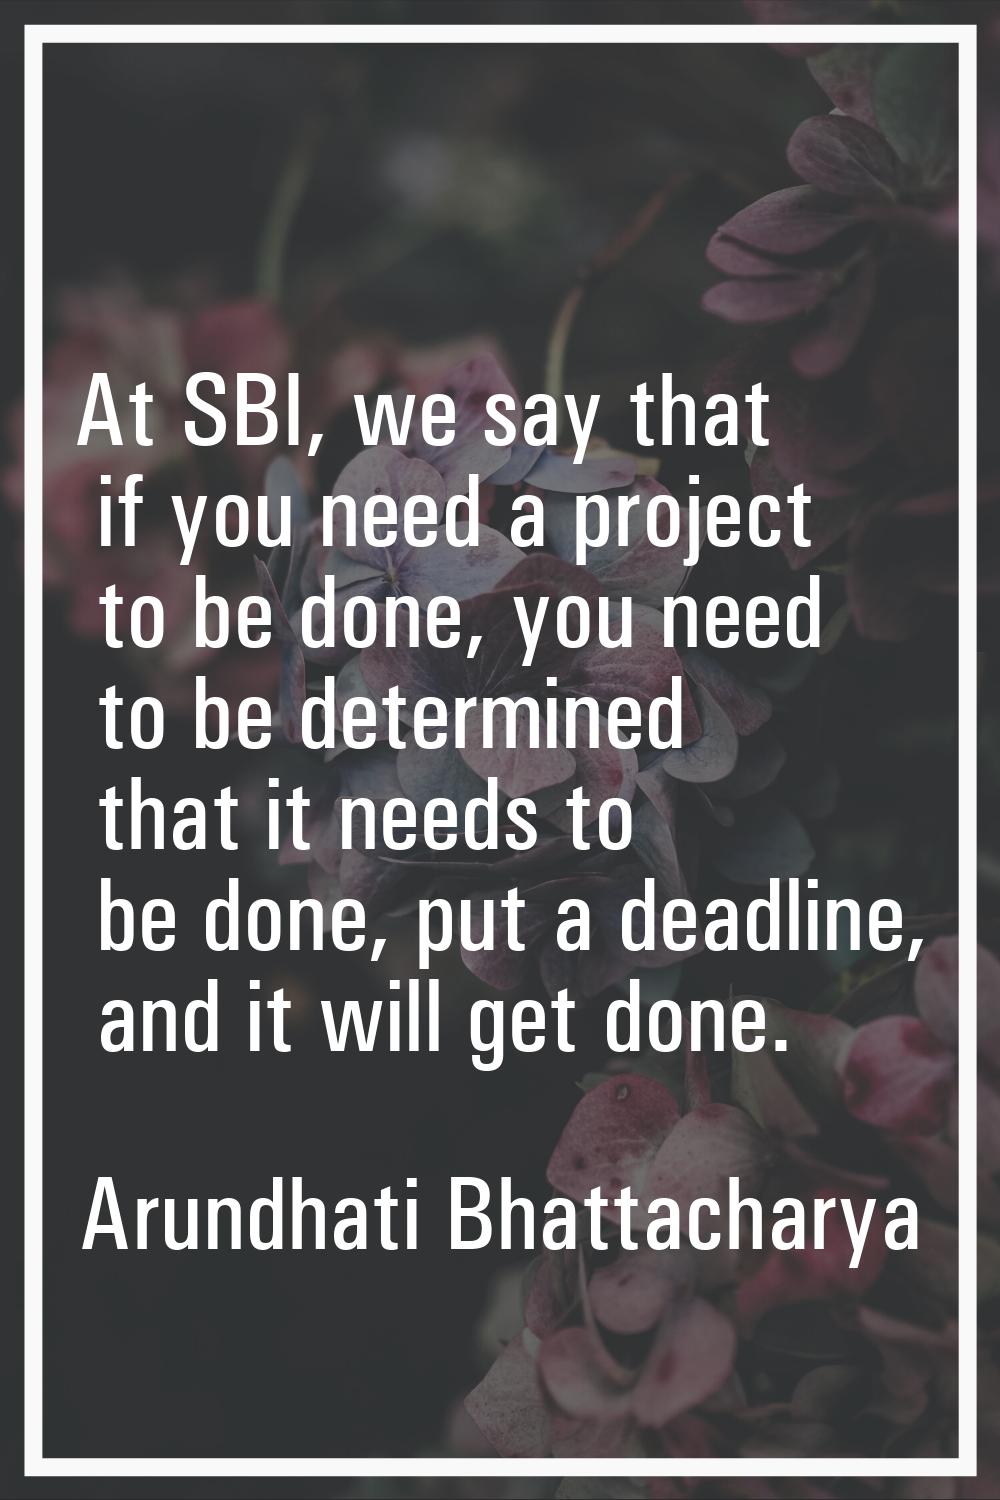 At SBI, we say that if you need a project to be done, you need to be determined that it needs to be